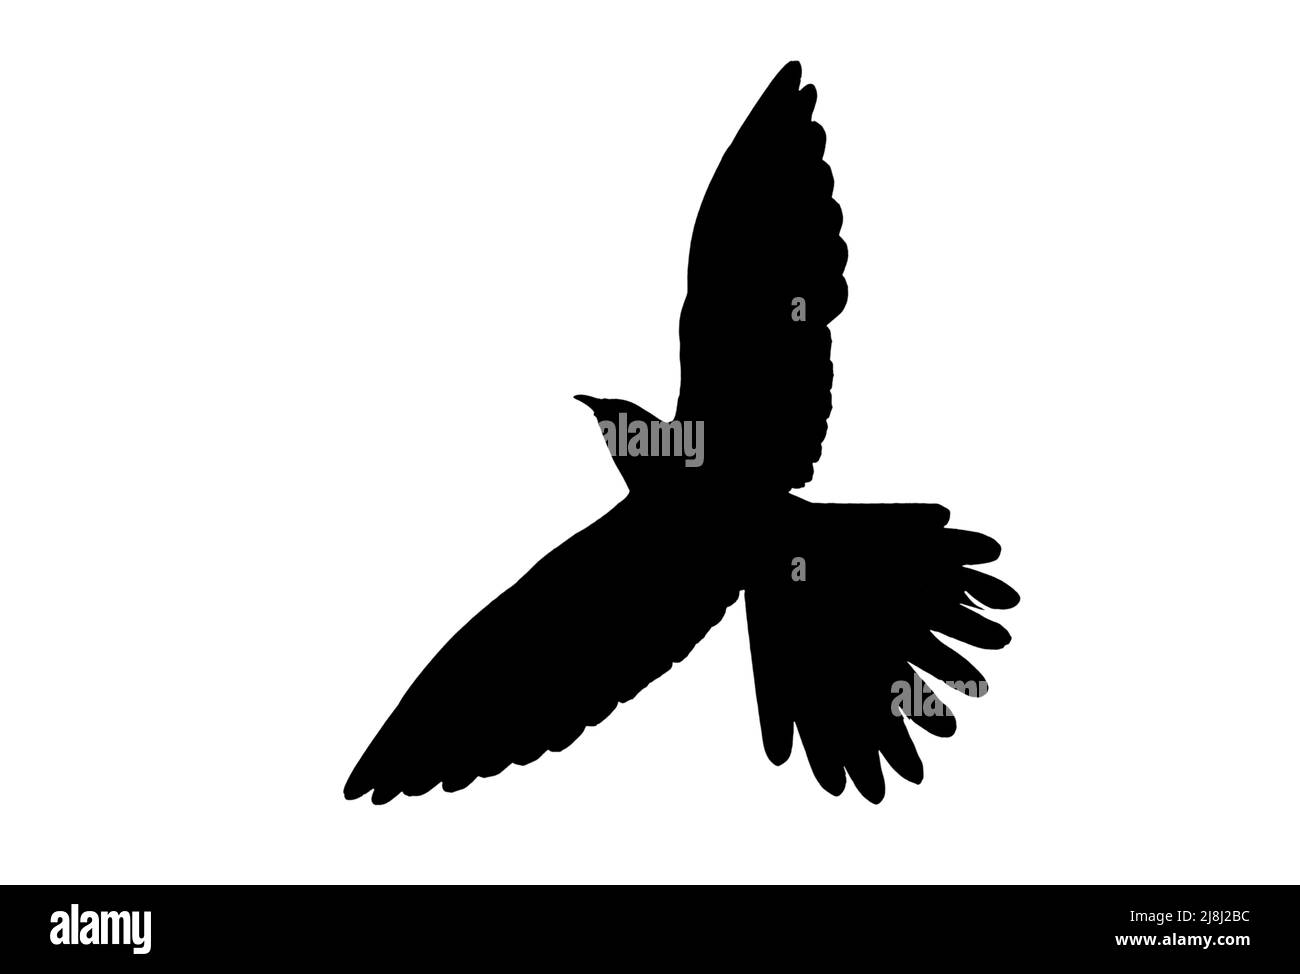 Silhouette of common cuckoo (Cuculus canorus) in flight outlined against white background to show wings, head and tail shapes Stock Photo